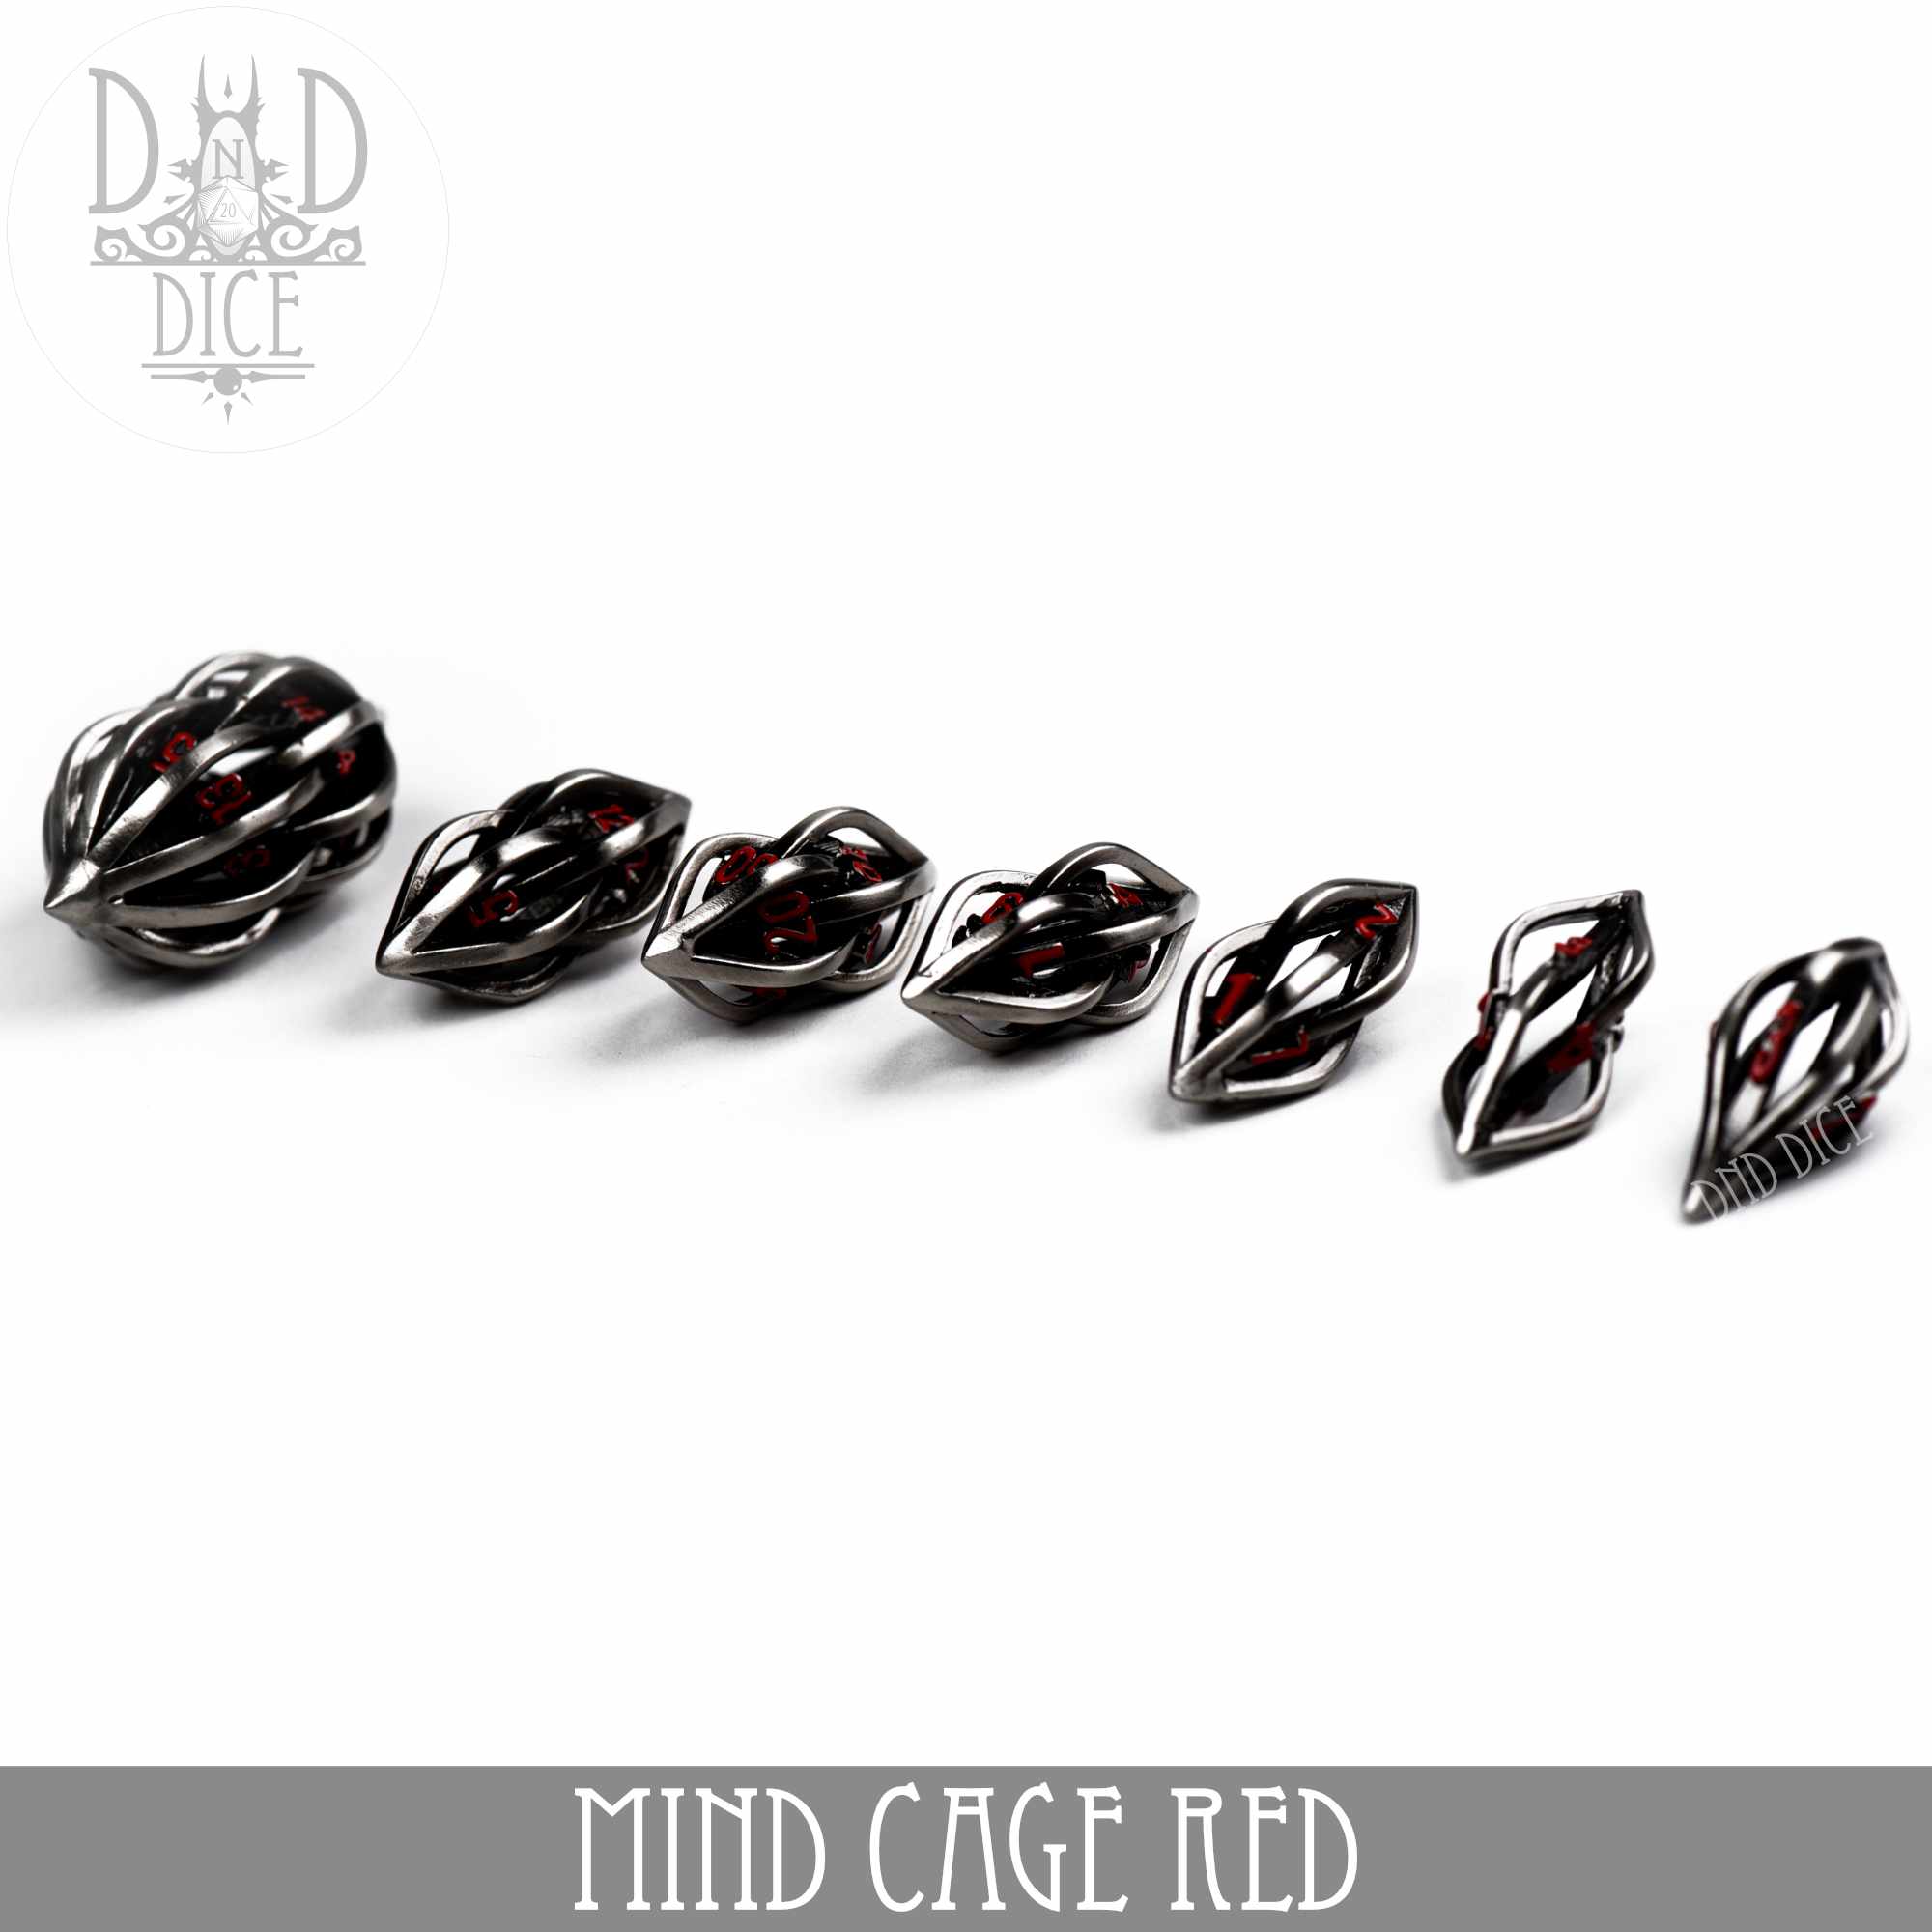 Mind Cage Red Hollow Metal Dice Set (Gift Box)